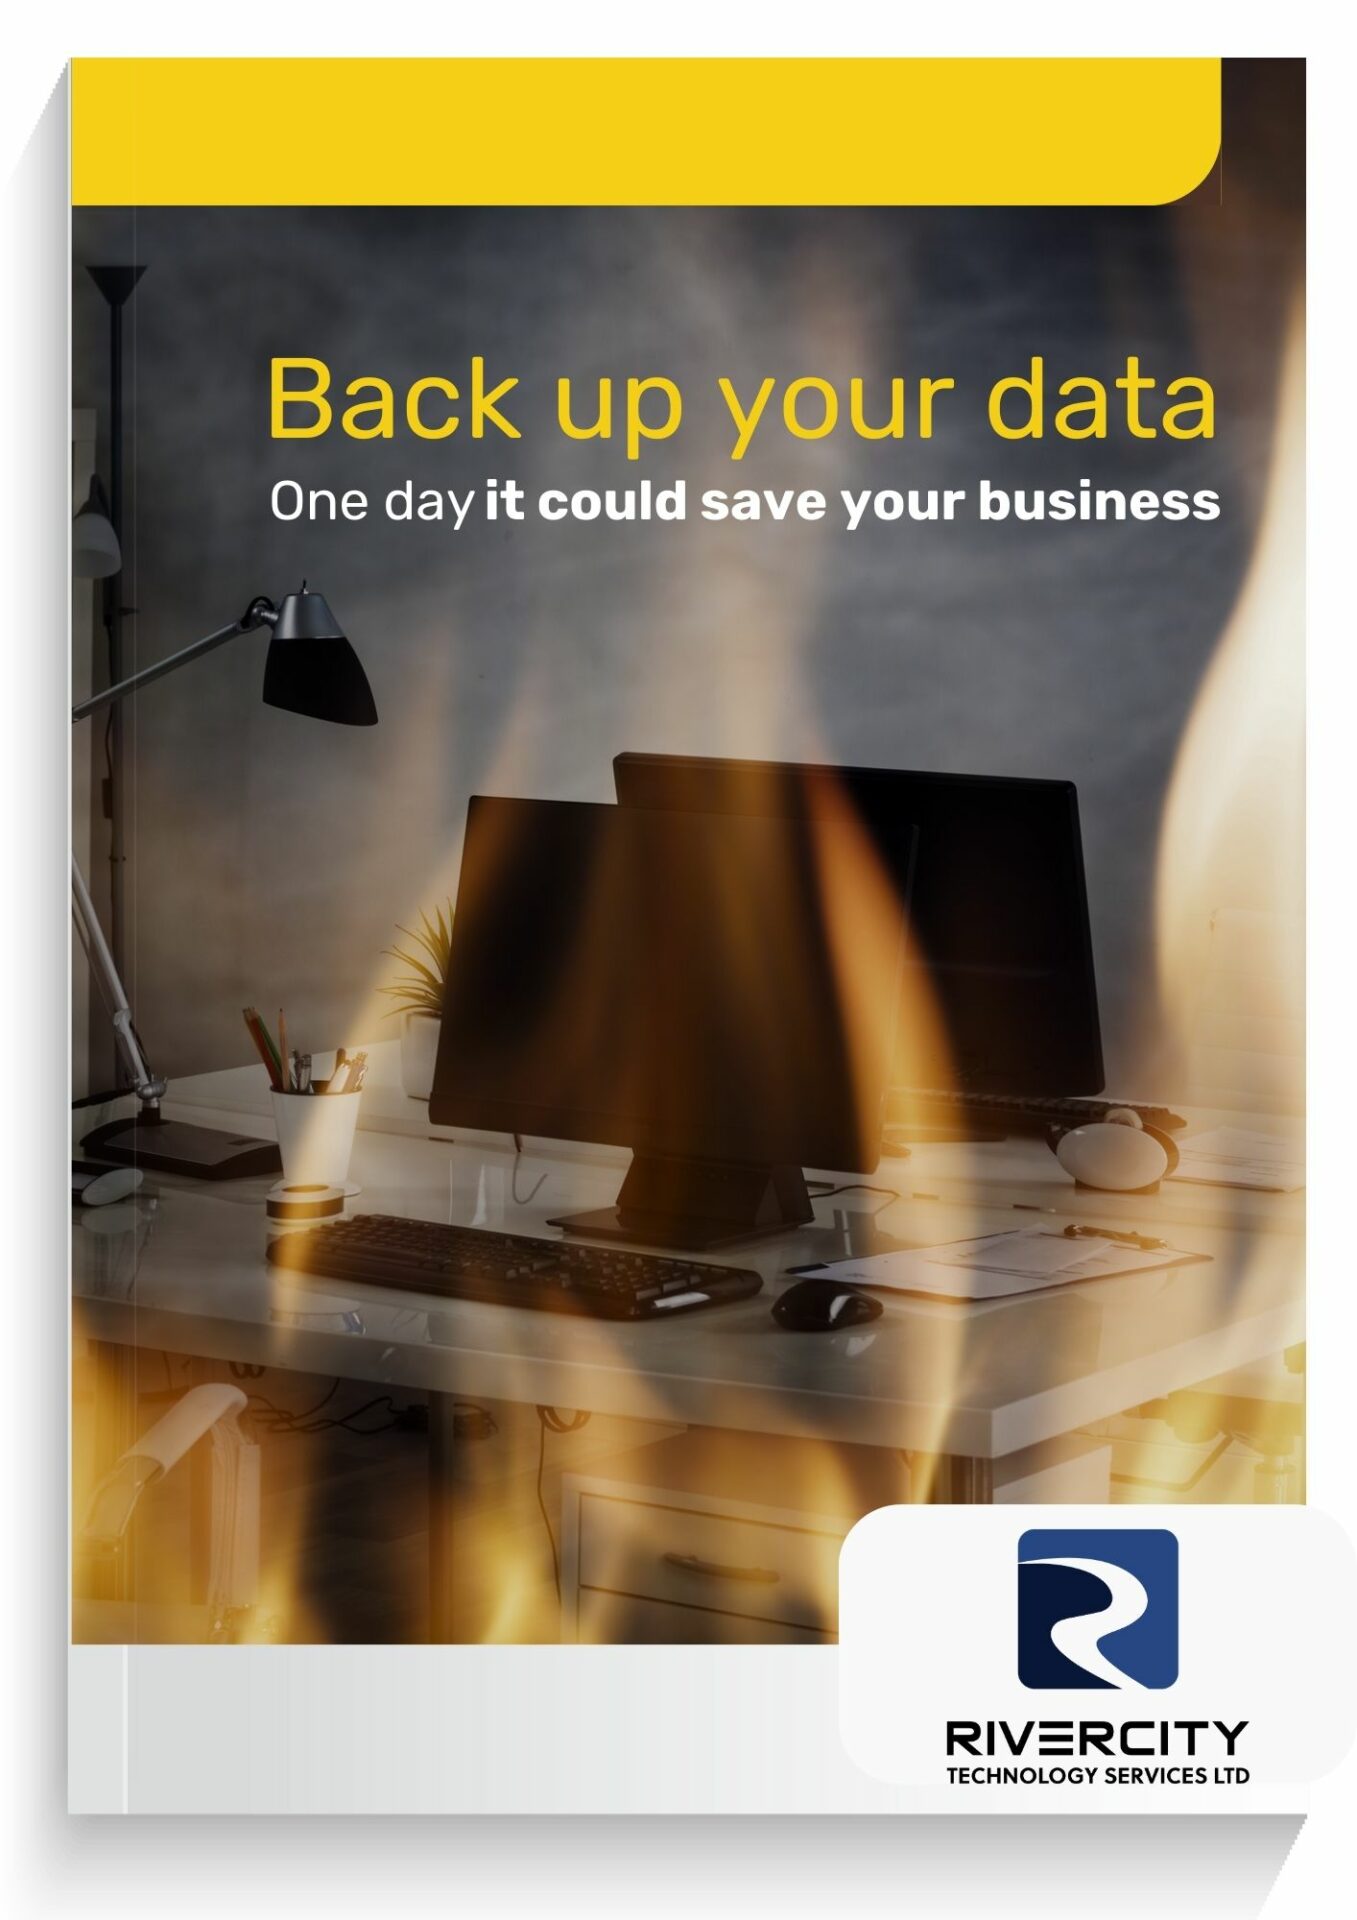 Promotional banner with the text "Back up your Data"